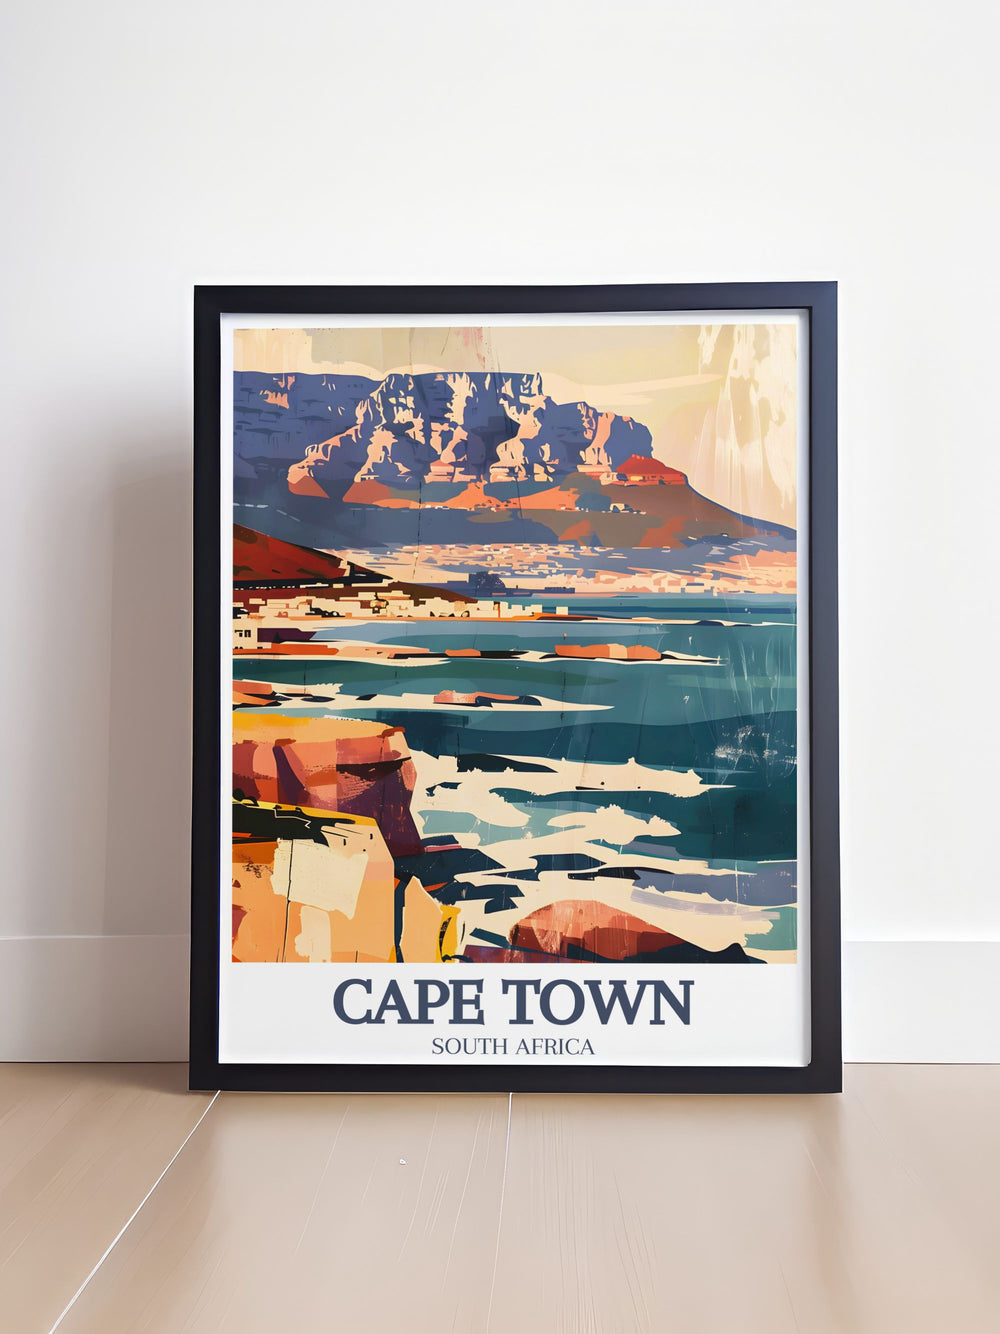 Cape Town art showcasing the majestic Table Mountain and the rugged Cape of Good Hope. This Cape Town poster is a must have for anyone who appreciates South Africa s breathtaking scenery. Perfect for adding a touch of Cape Town to your home or office decor.